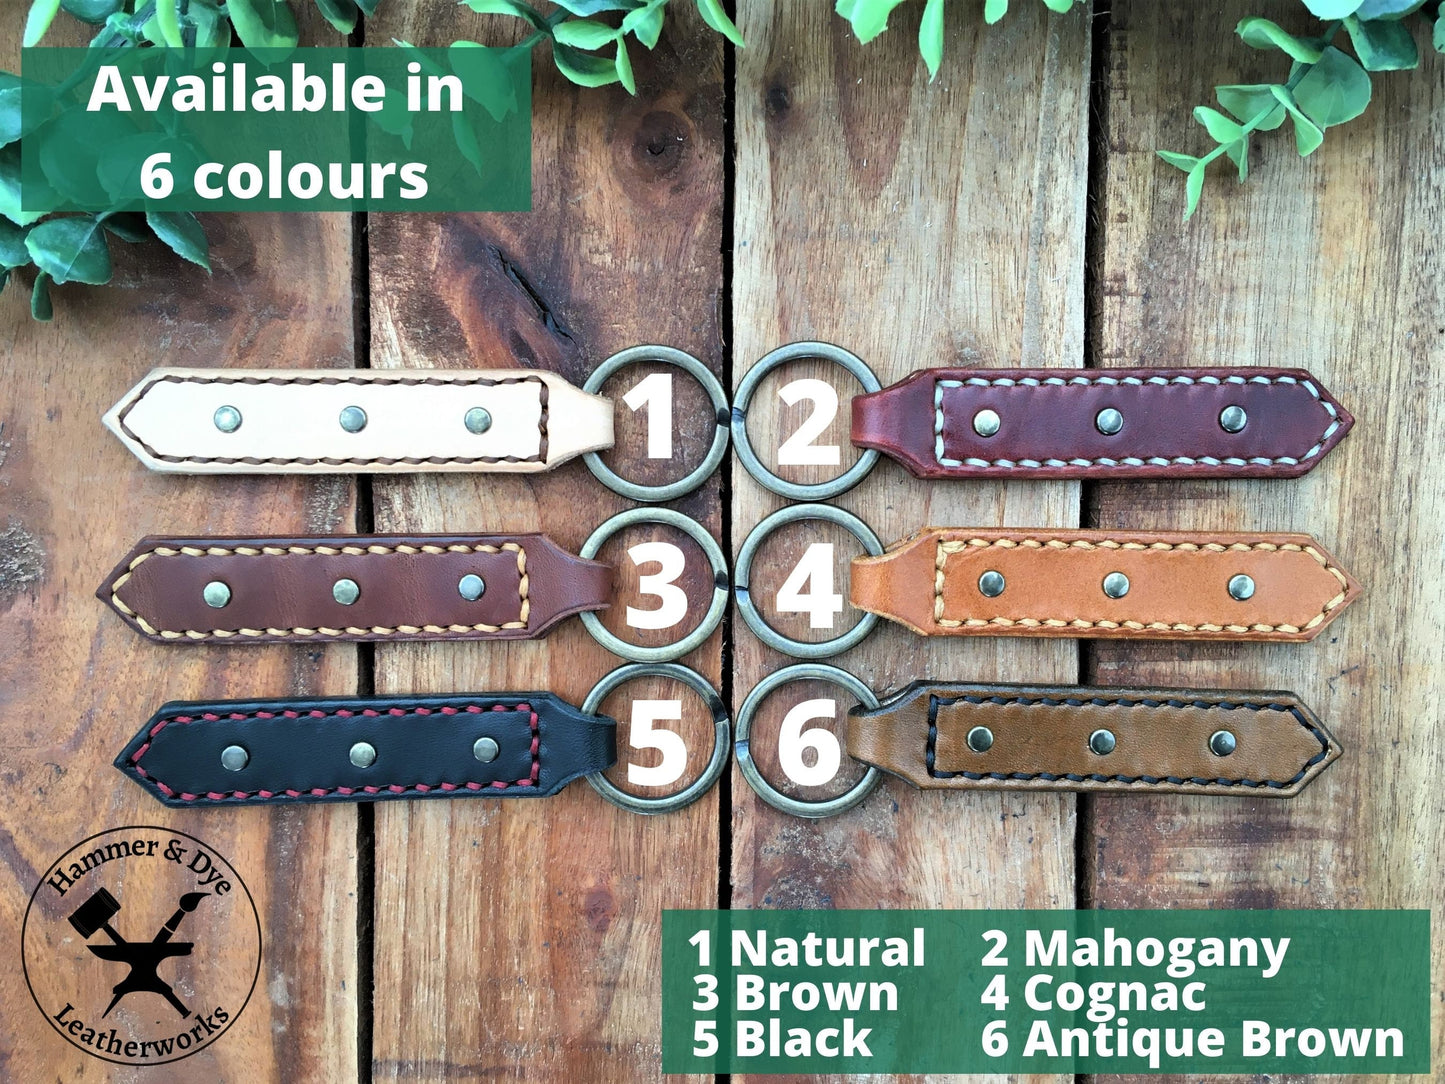 Handmade Leather Studded Keychains in a the various available colors